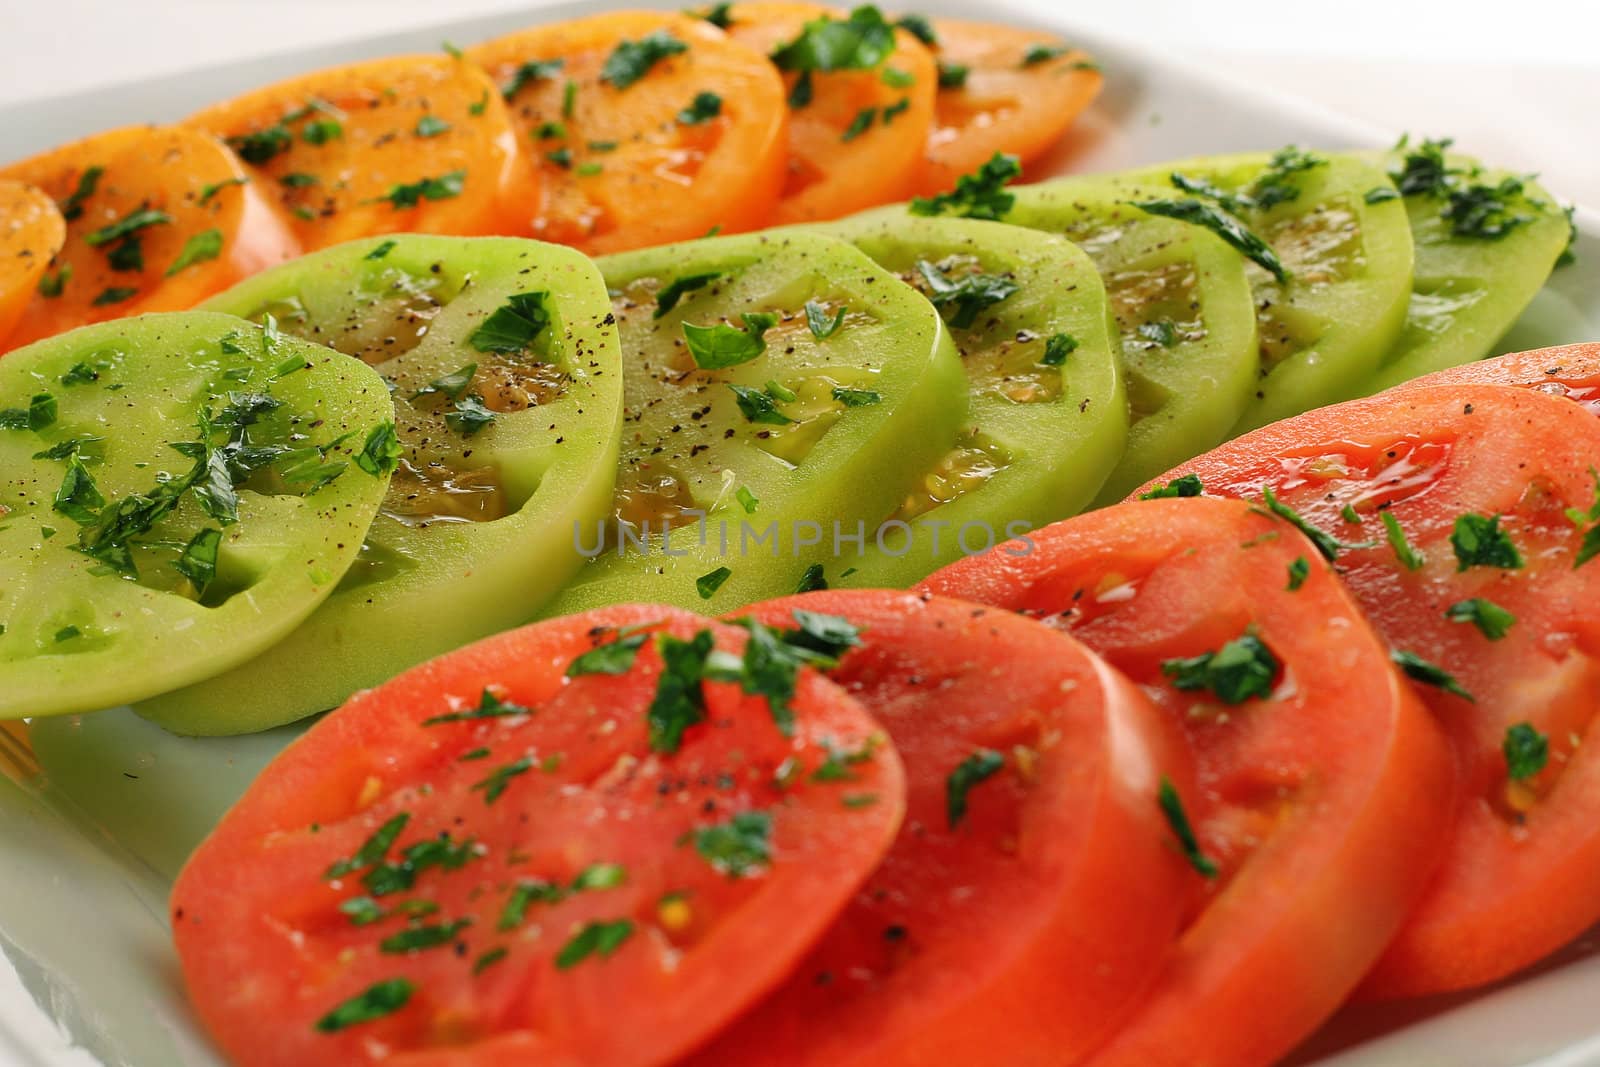 shot of yellow green & red tomatoes copy by creativestock